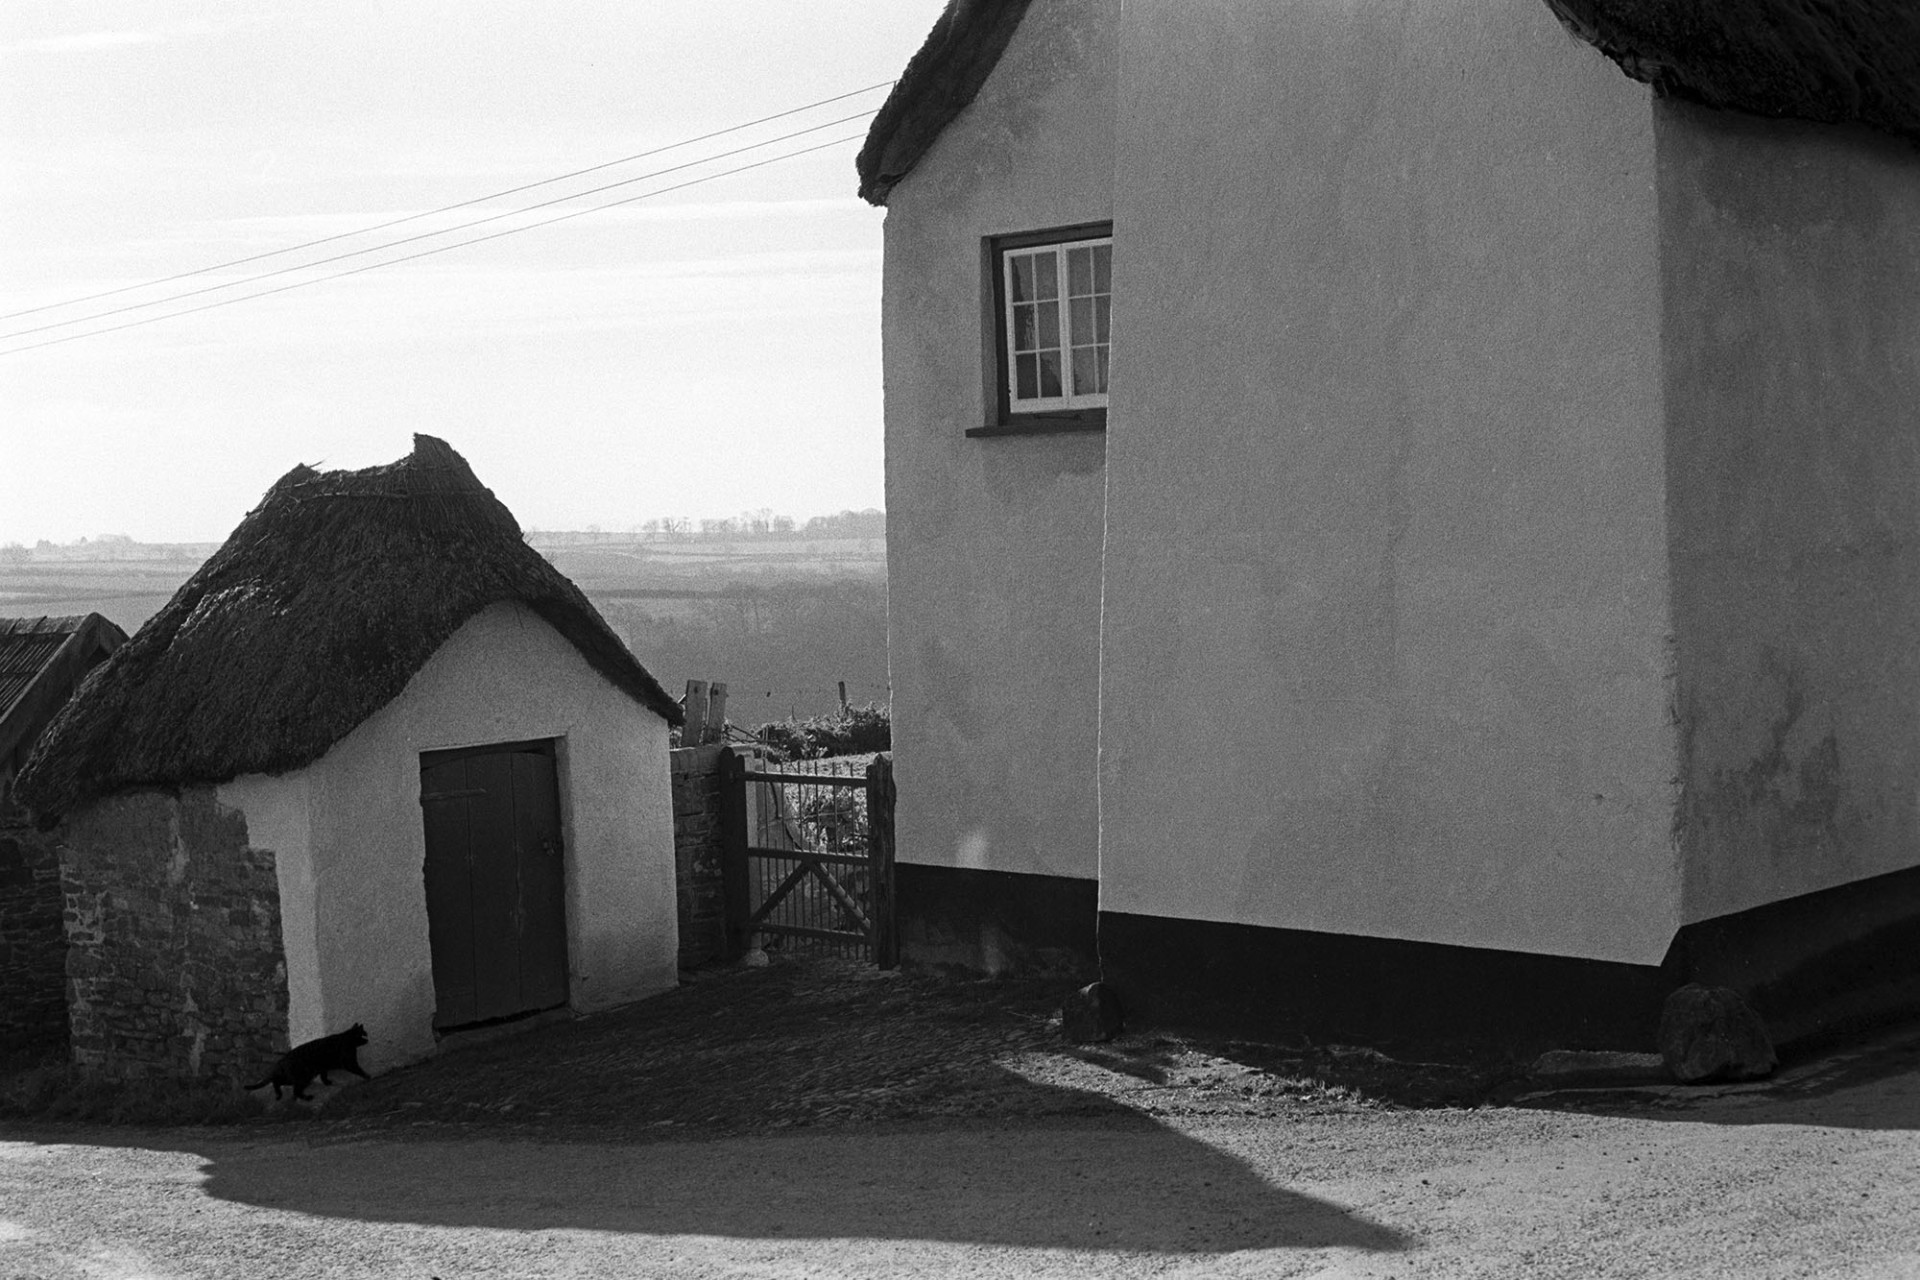 Thatched shed and cottage with cat.
[A cat walking past a thatched shed next to a thatch cottage at Roborough. 
For more information see the 'Additional notes by James Ravilious' field.]